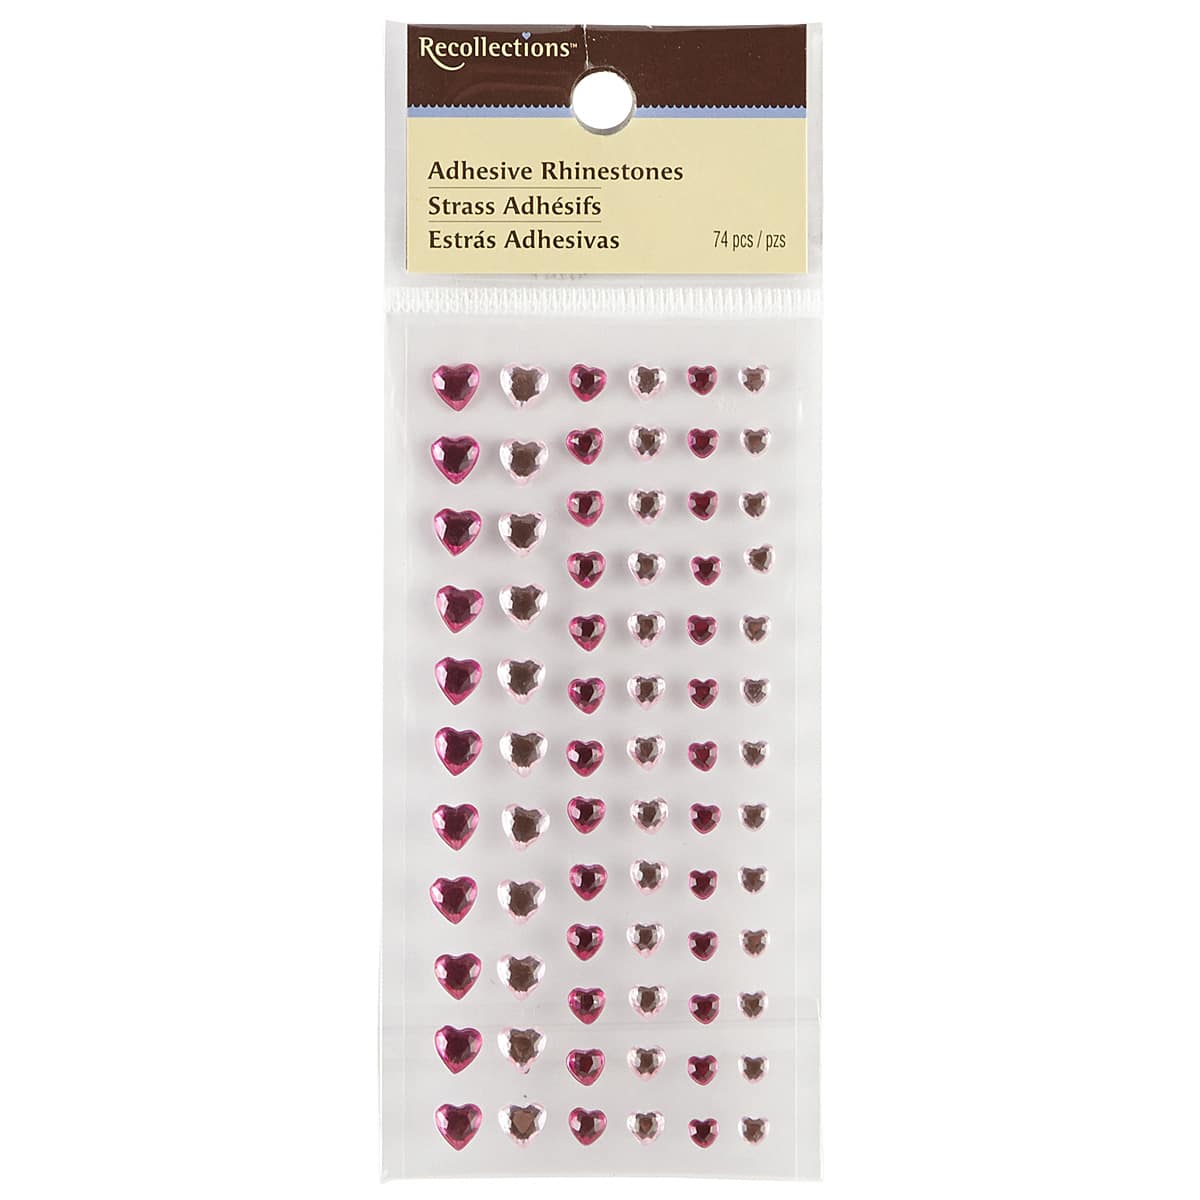 Heart Shaped Rhinestone Stickers, Assorted Sizes, 54-Count - Pink